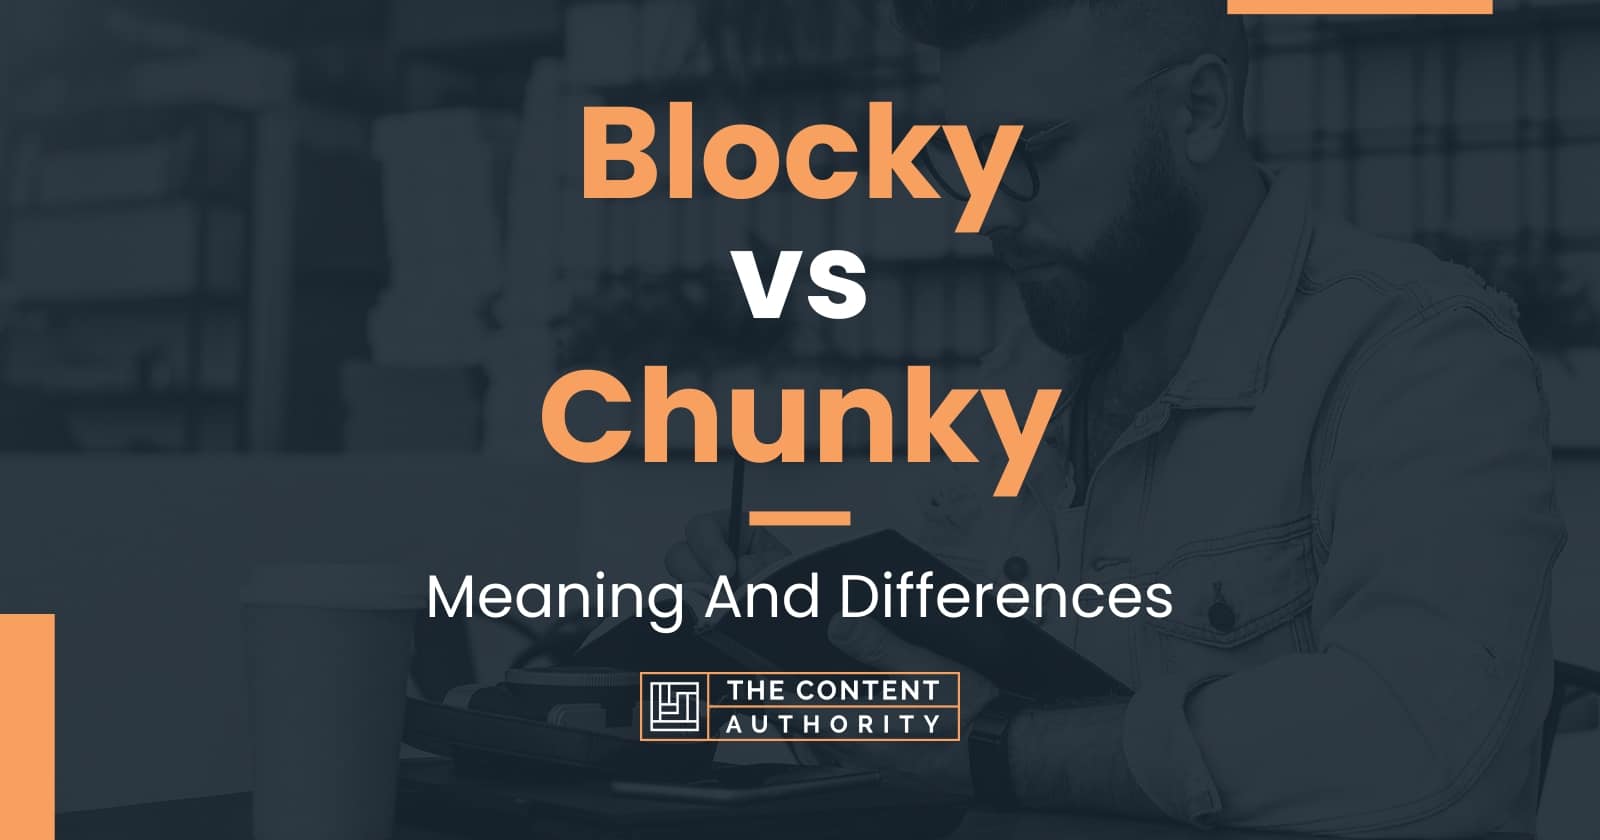 Blocky vs Chunky Meaning And Differences